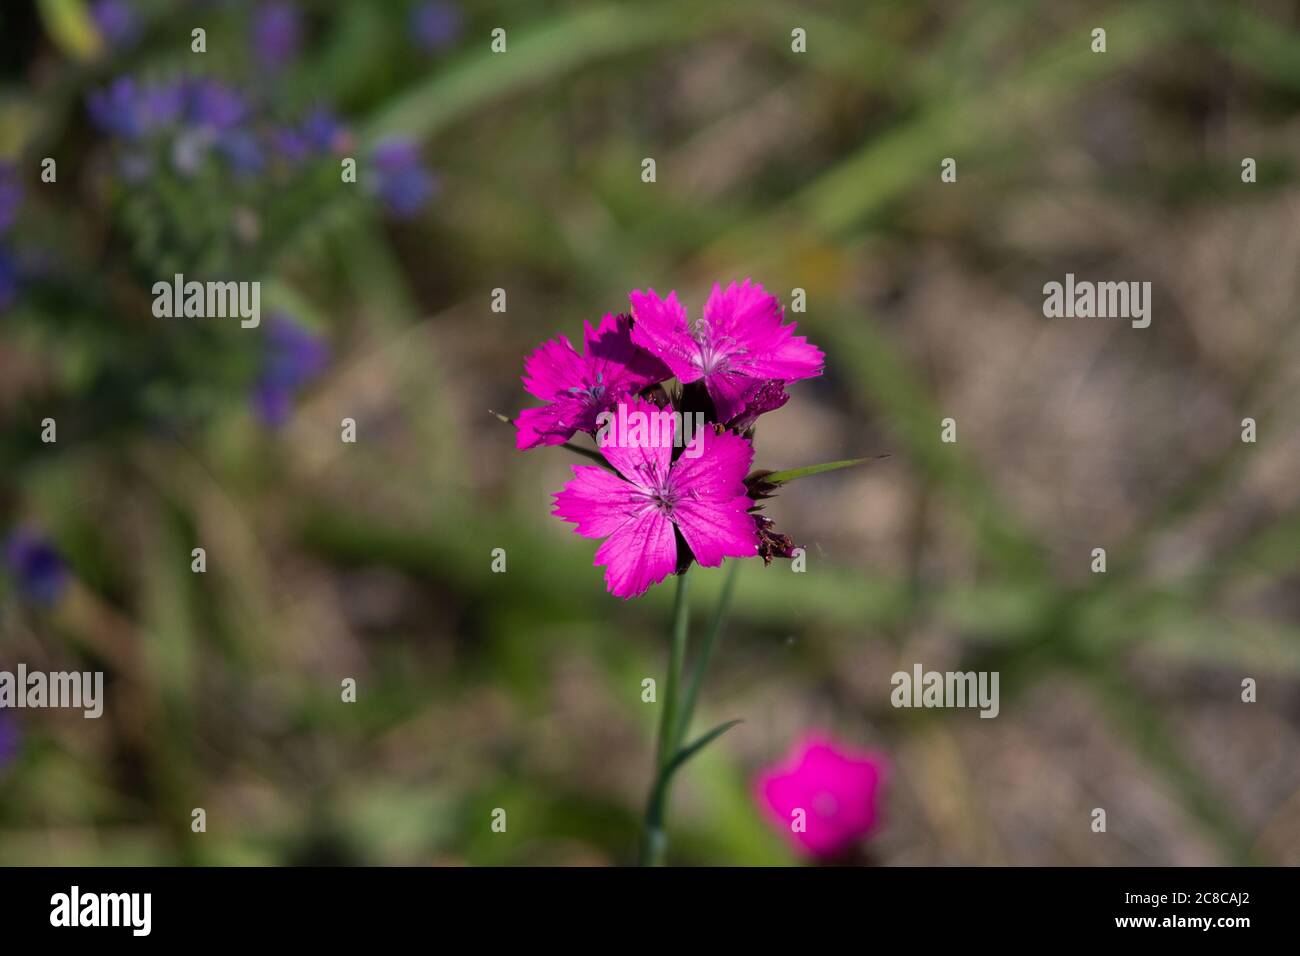 Flower head of a Carthusian carnation with several flowers. Dianthus carthusianorum Stock Photo